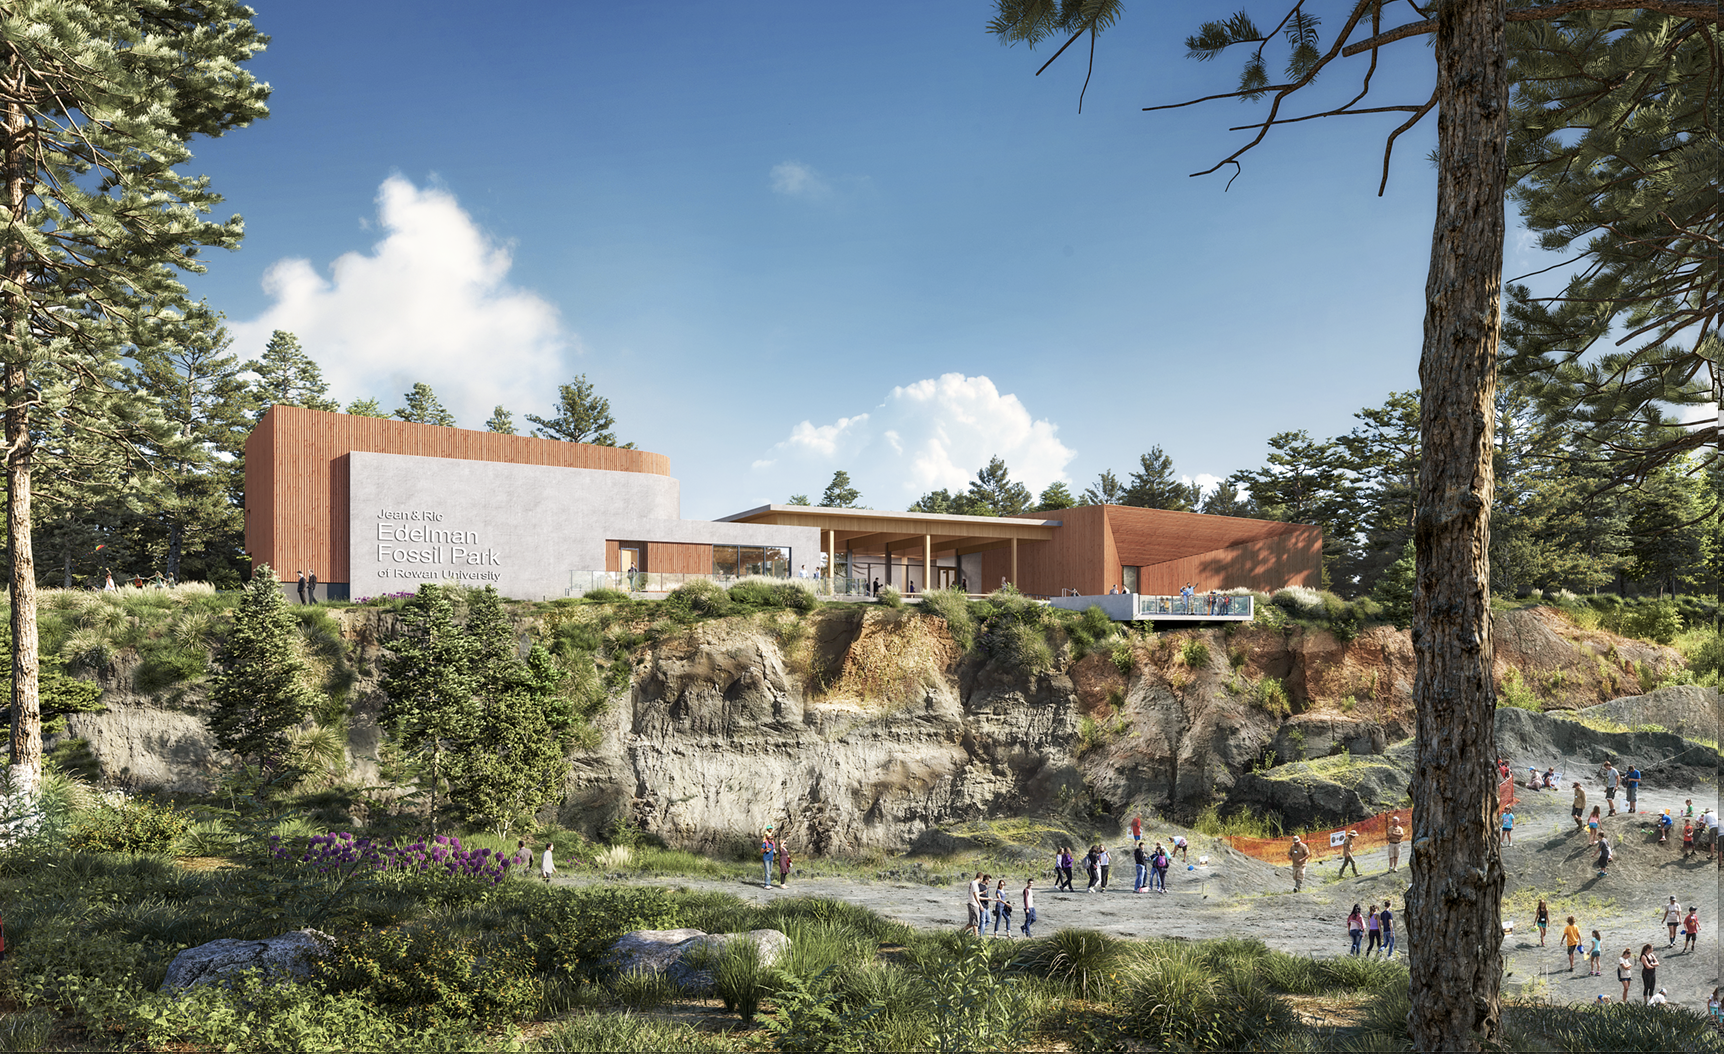 rendering of the grounds to open for fossil digs and nature walks